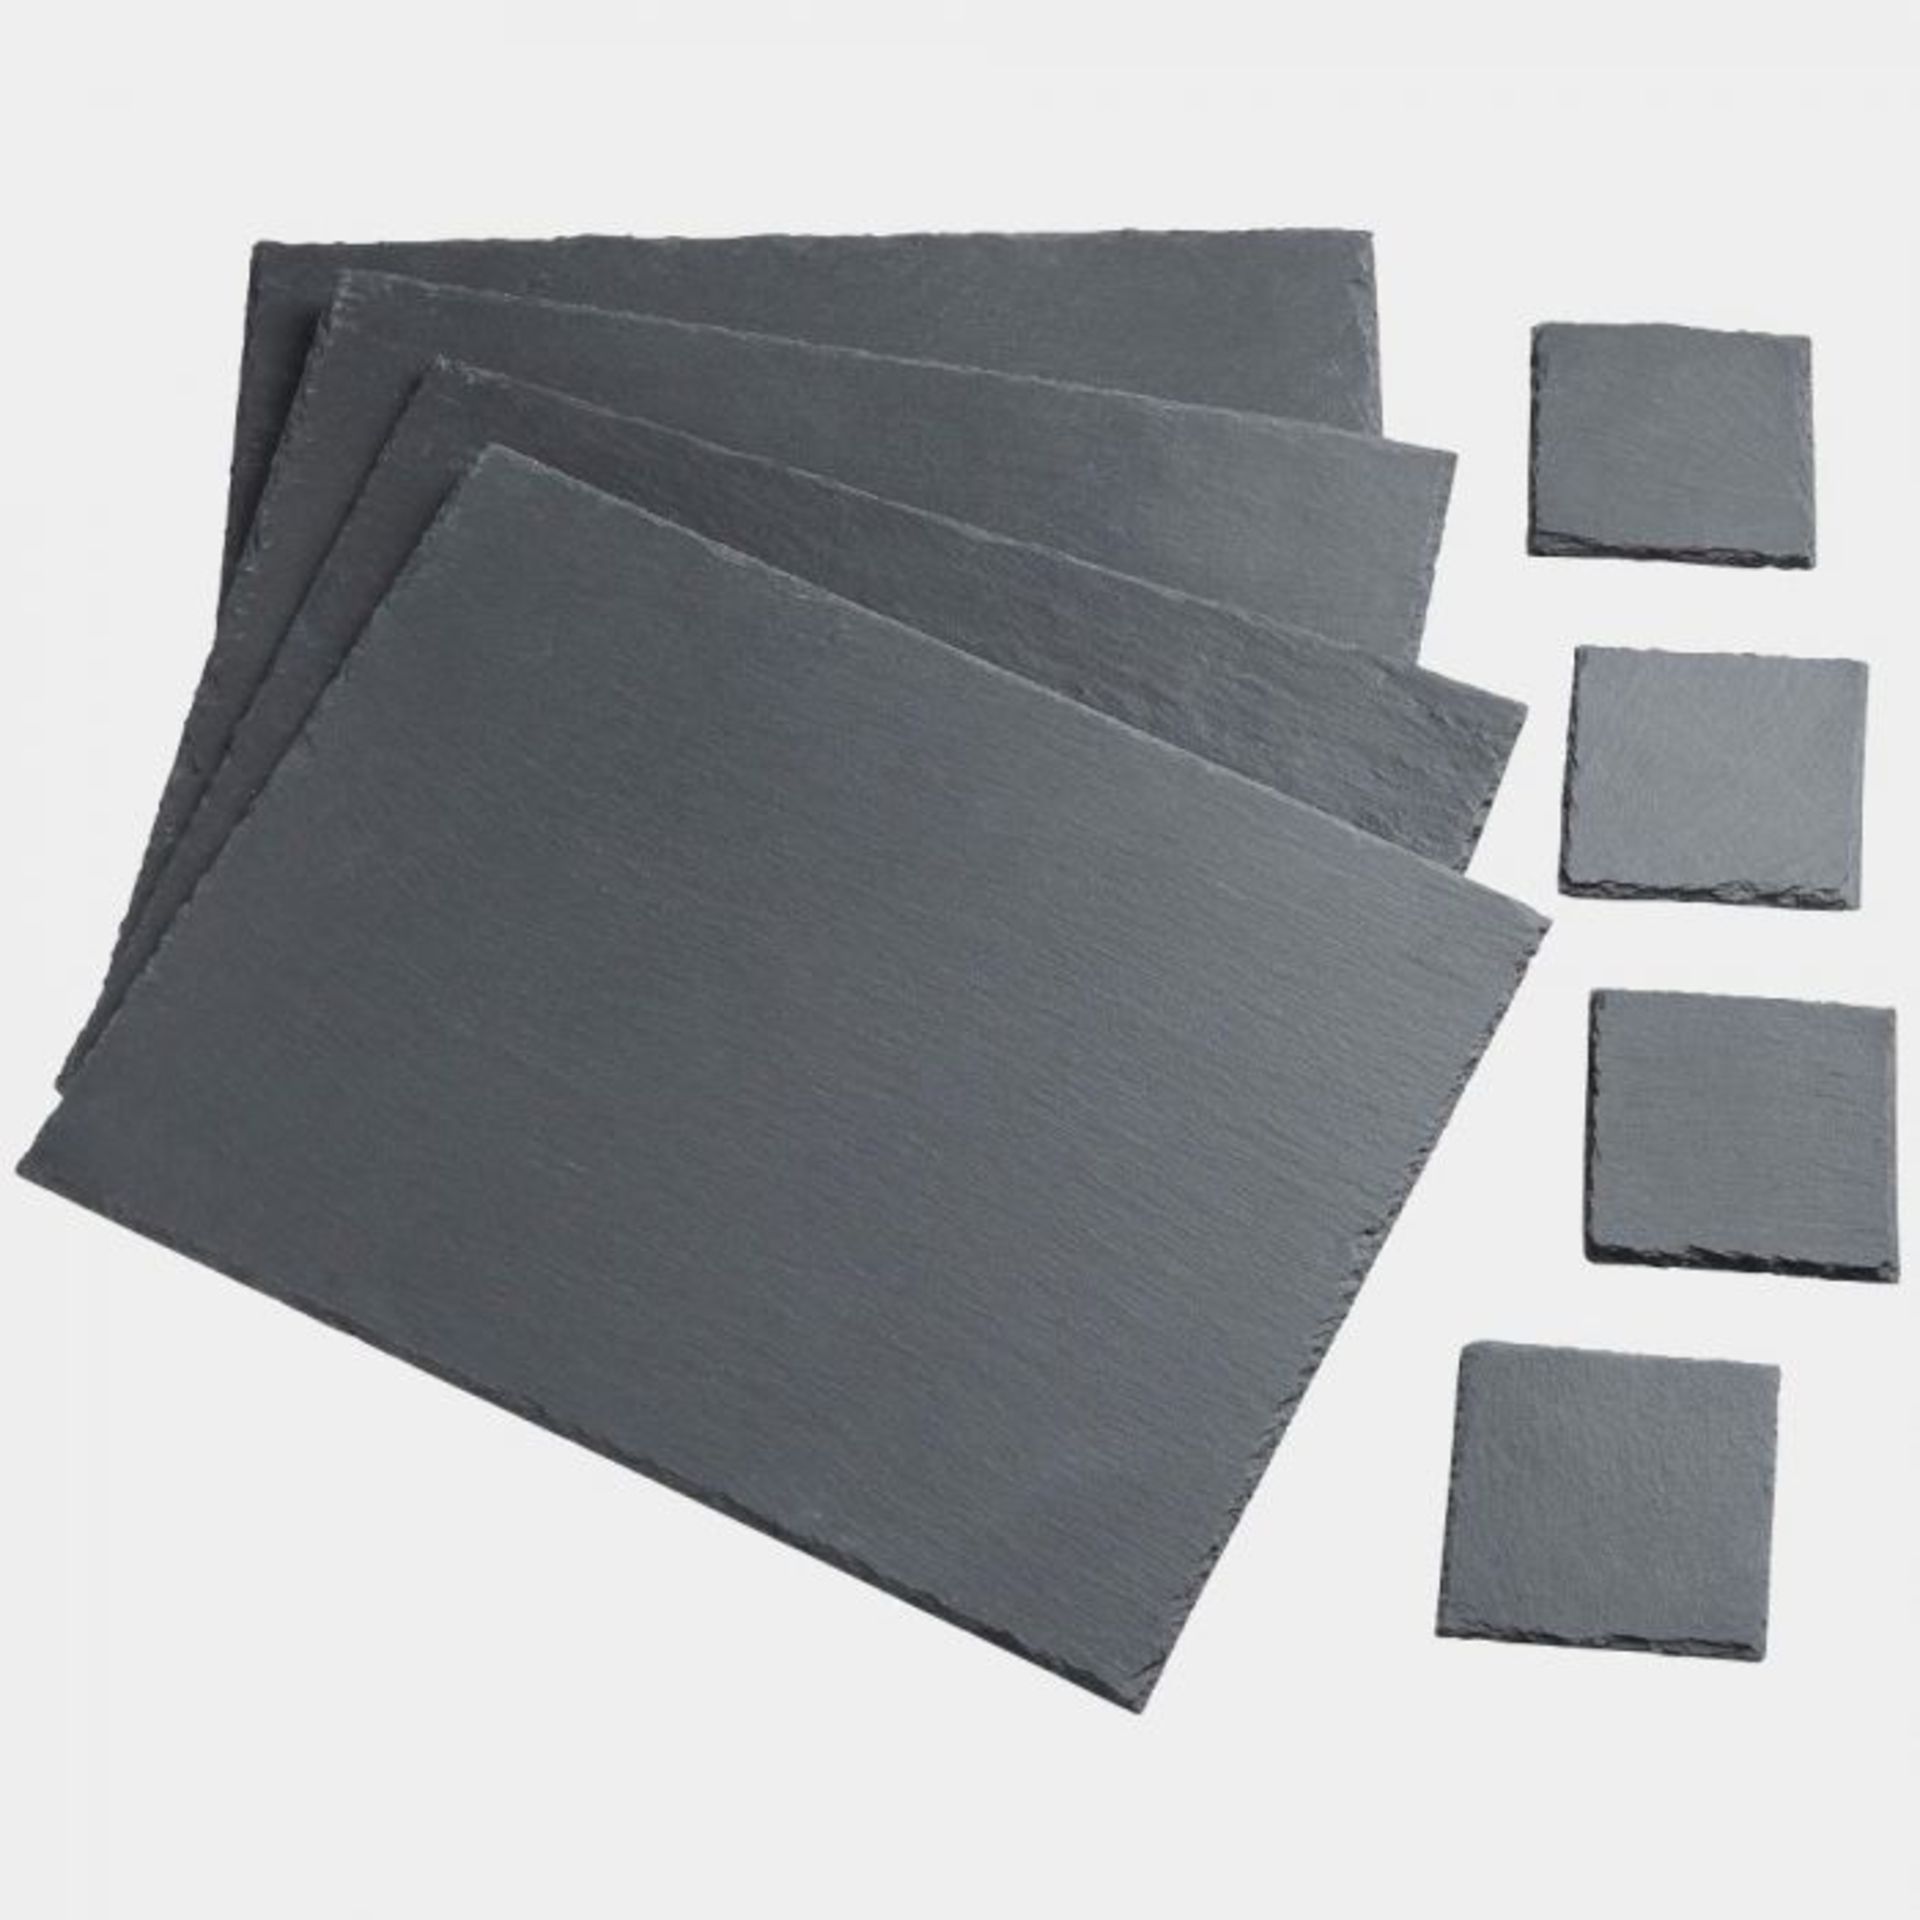 (V167) 8 Piece Slate Placemat & Coaster Set Measuring 40 X 30cm each, these placemats are the ... - Image 2 of 4